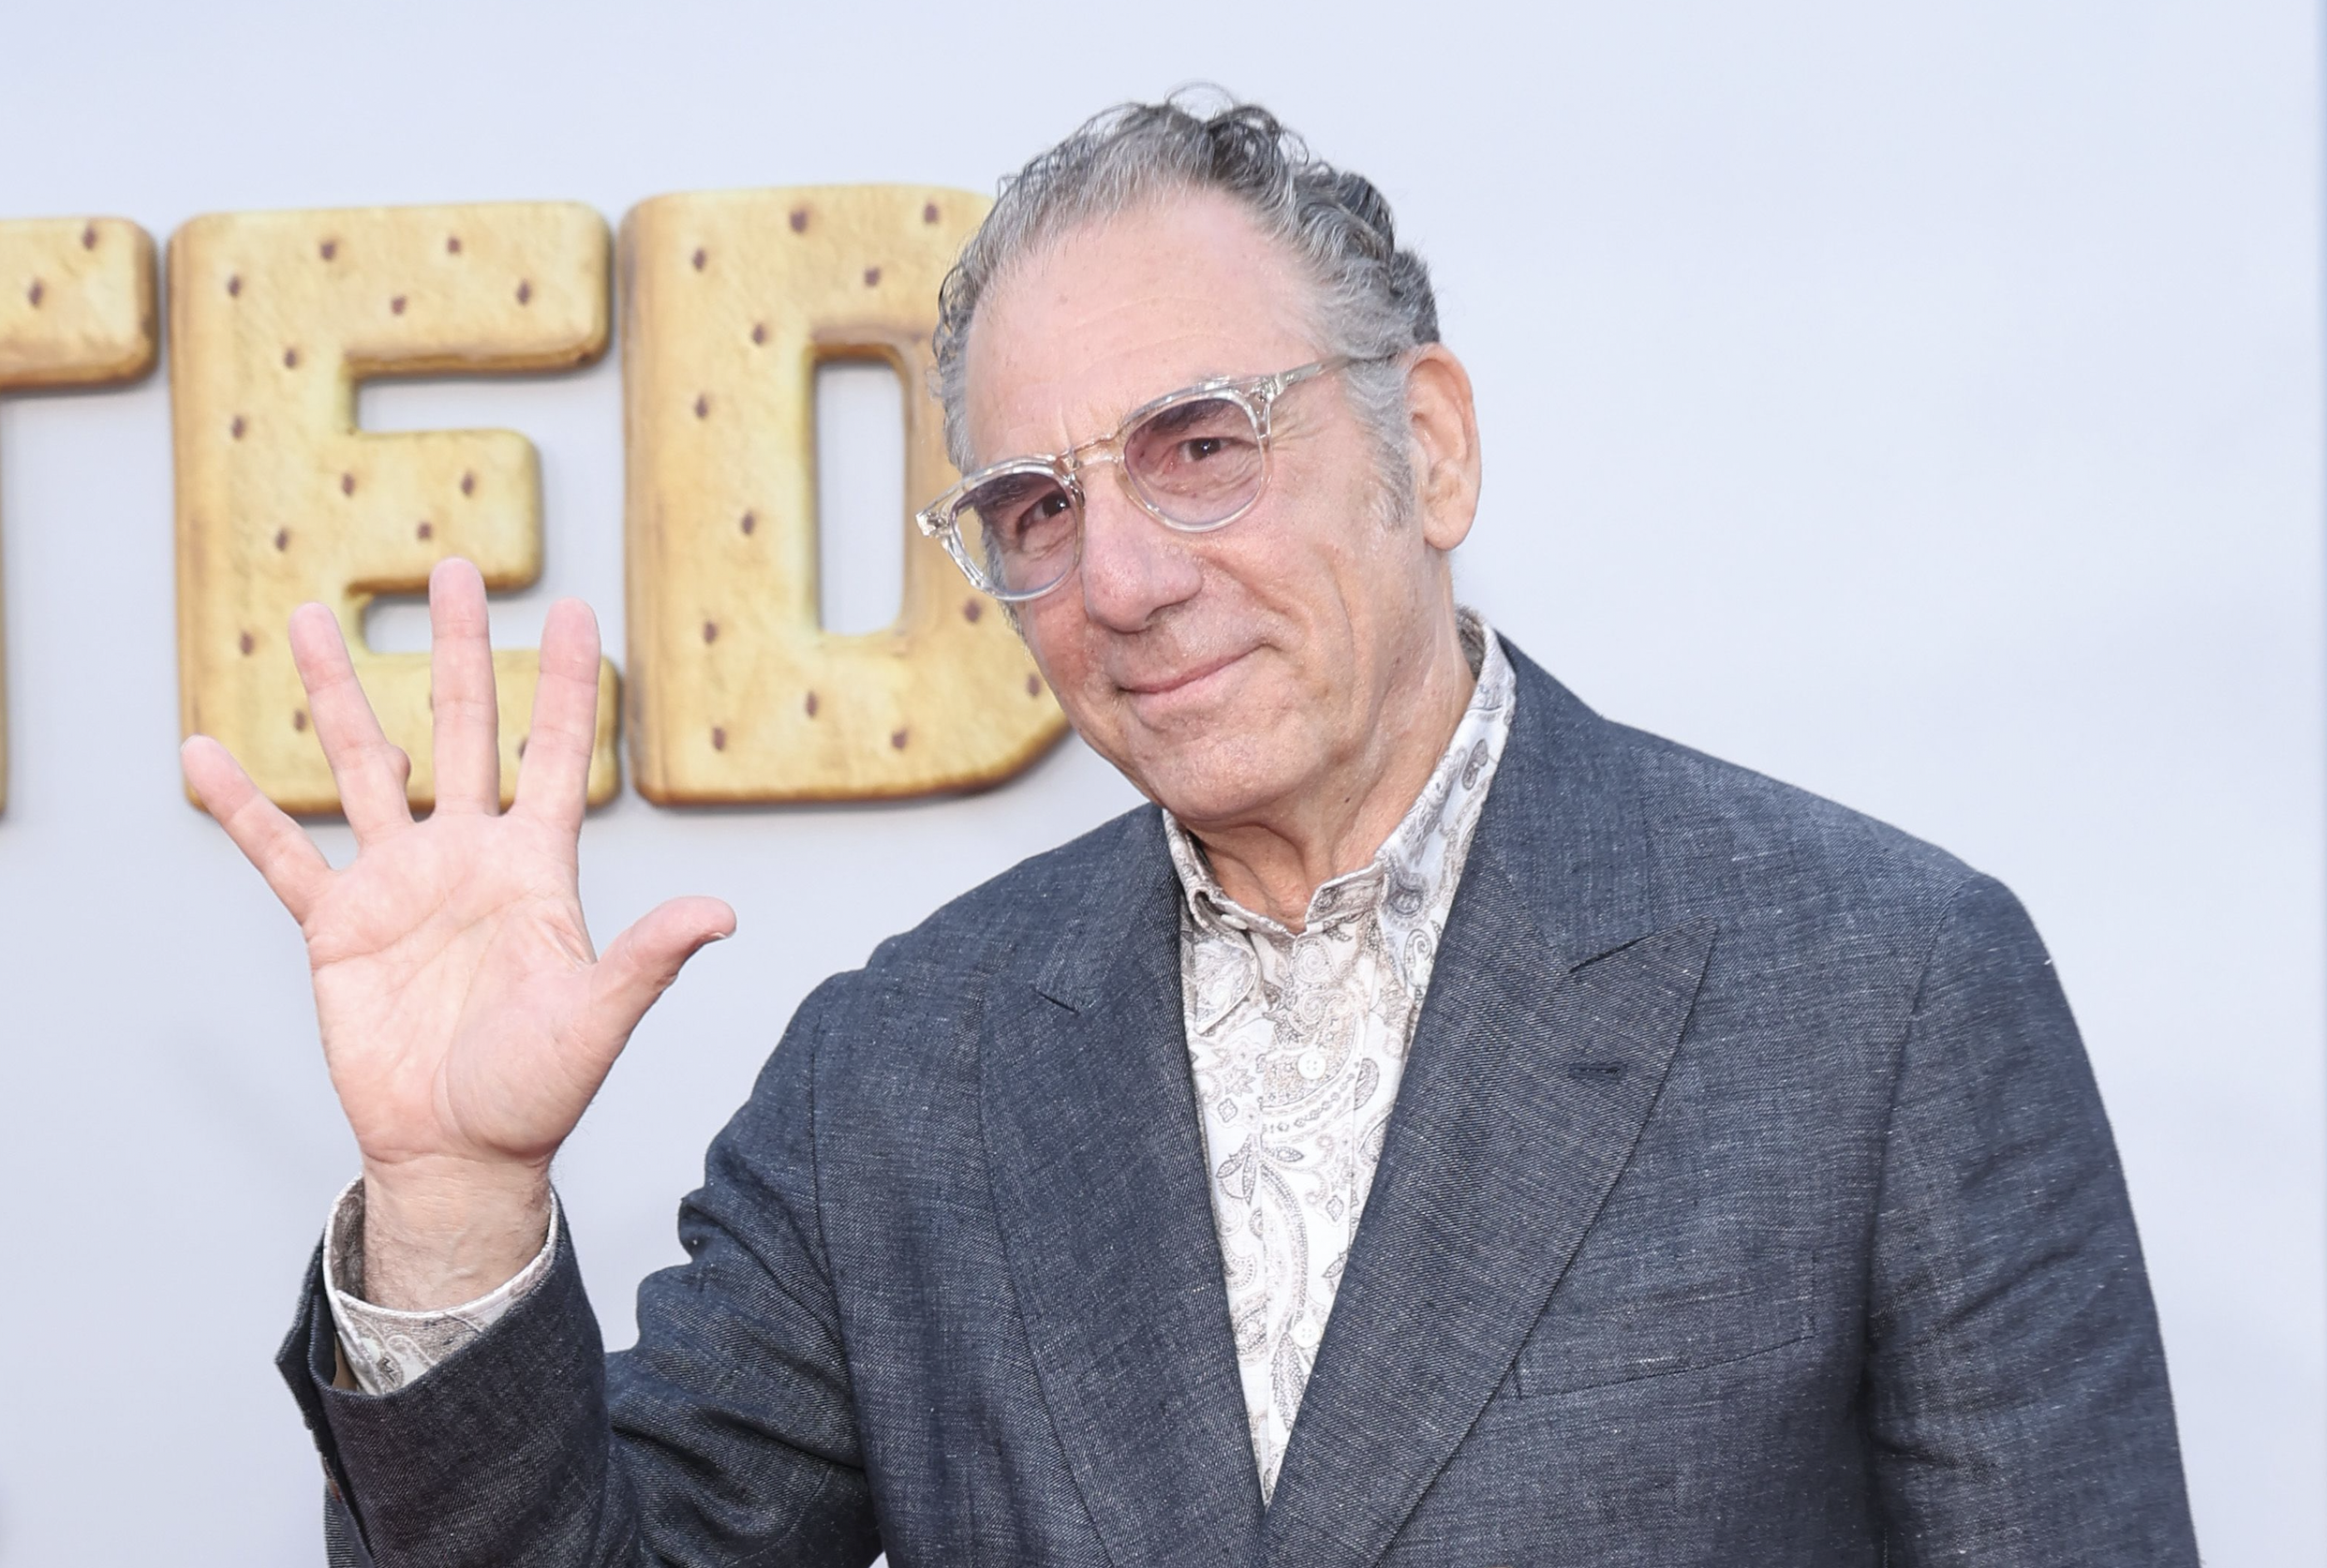 ‘Seinfeld’ Star Michael Richards Says ‘I’m Not Racist’ or ‘Looking for a Comeback,’ Nearly 18 Years After Racist Outburst...